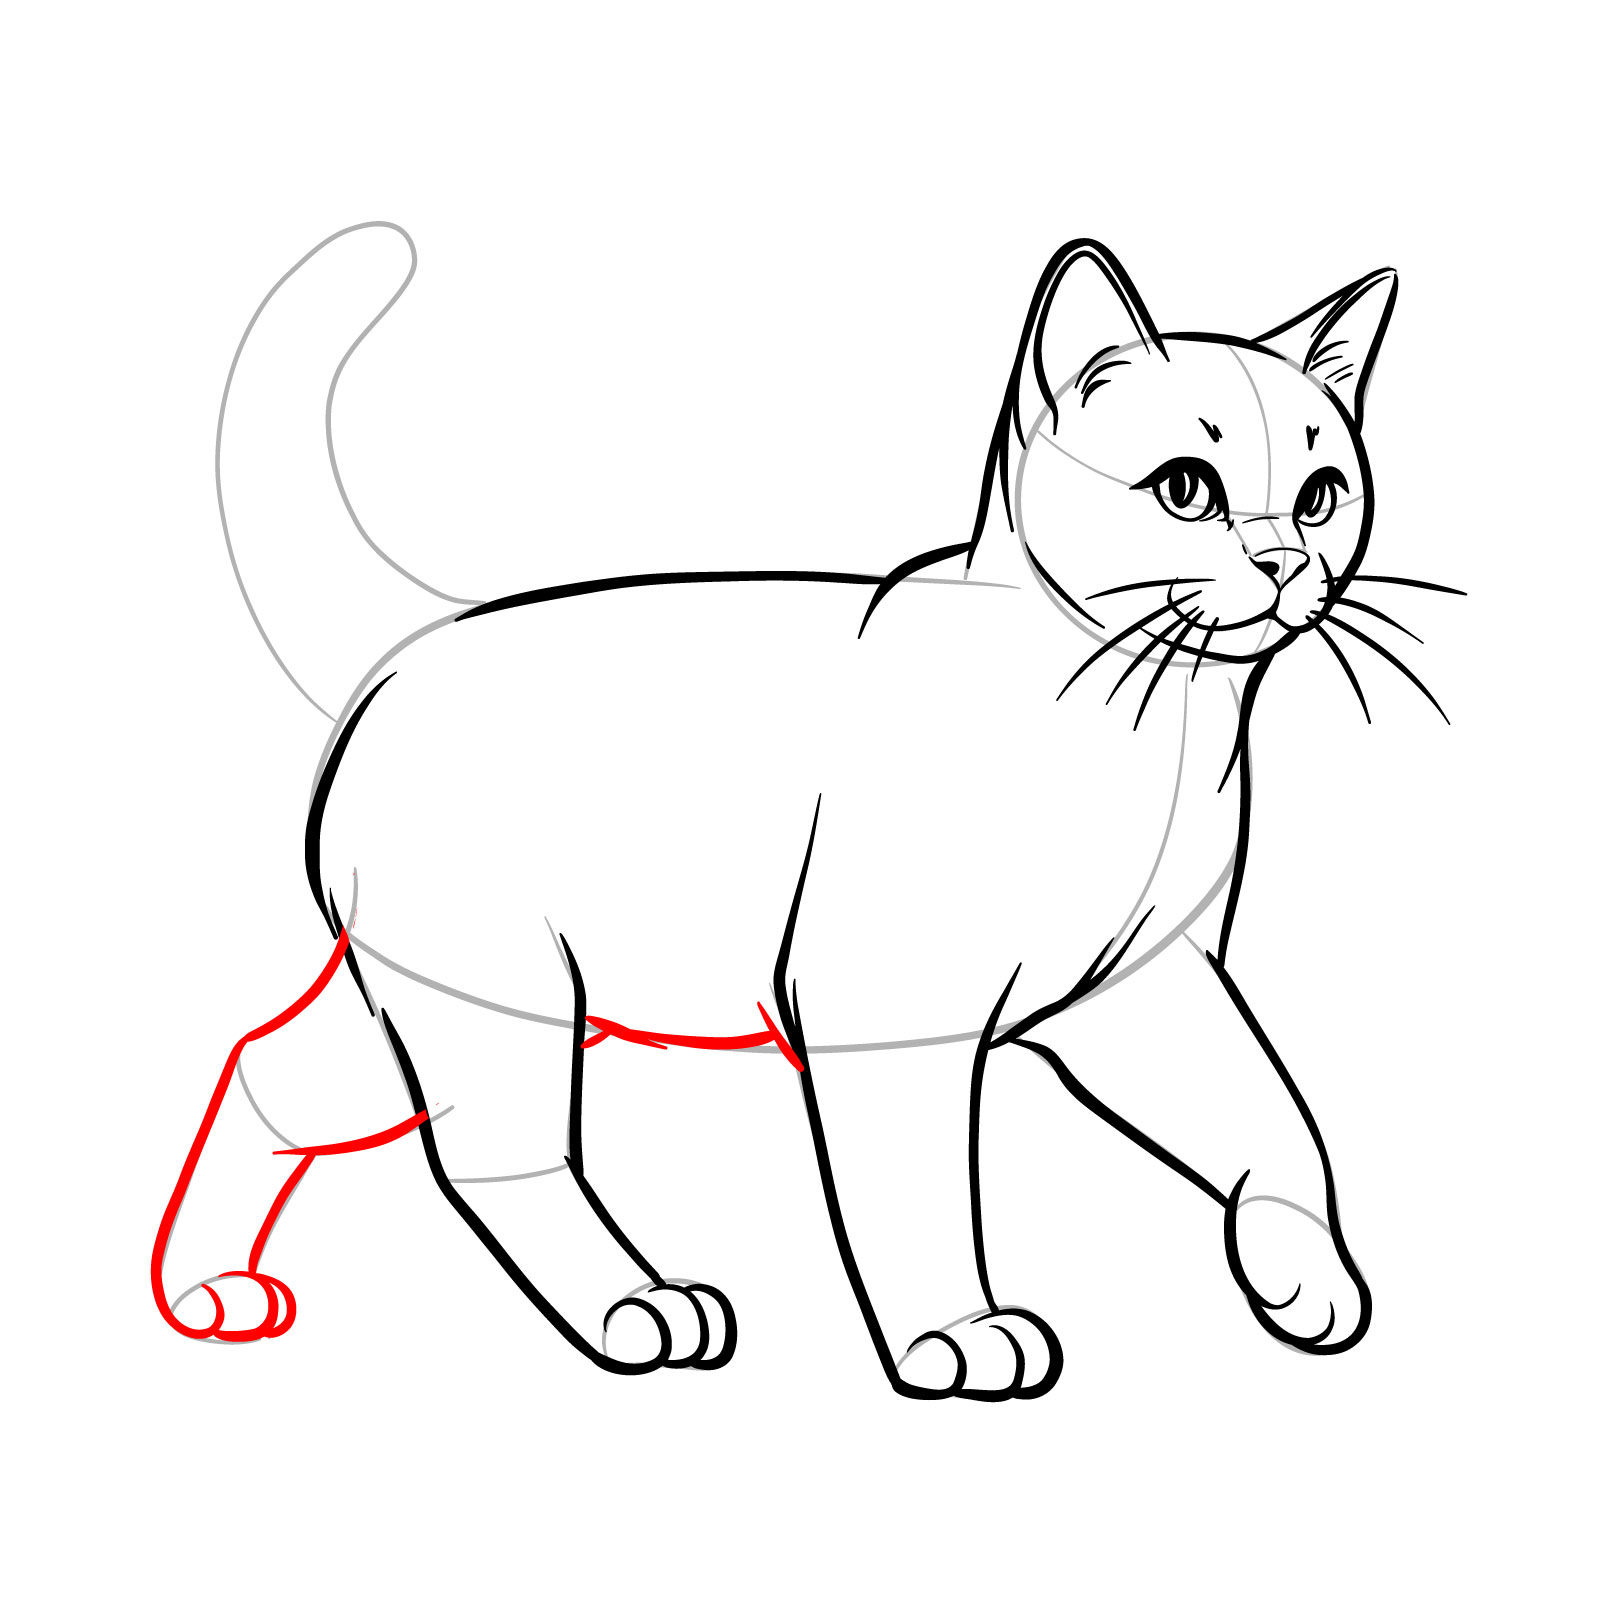 Illustrating the second back leg and the lower body of a walking cat - step 12